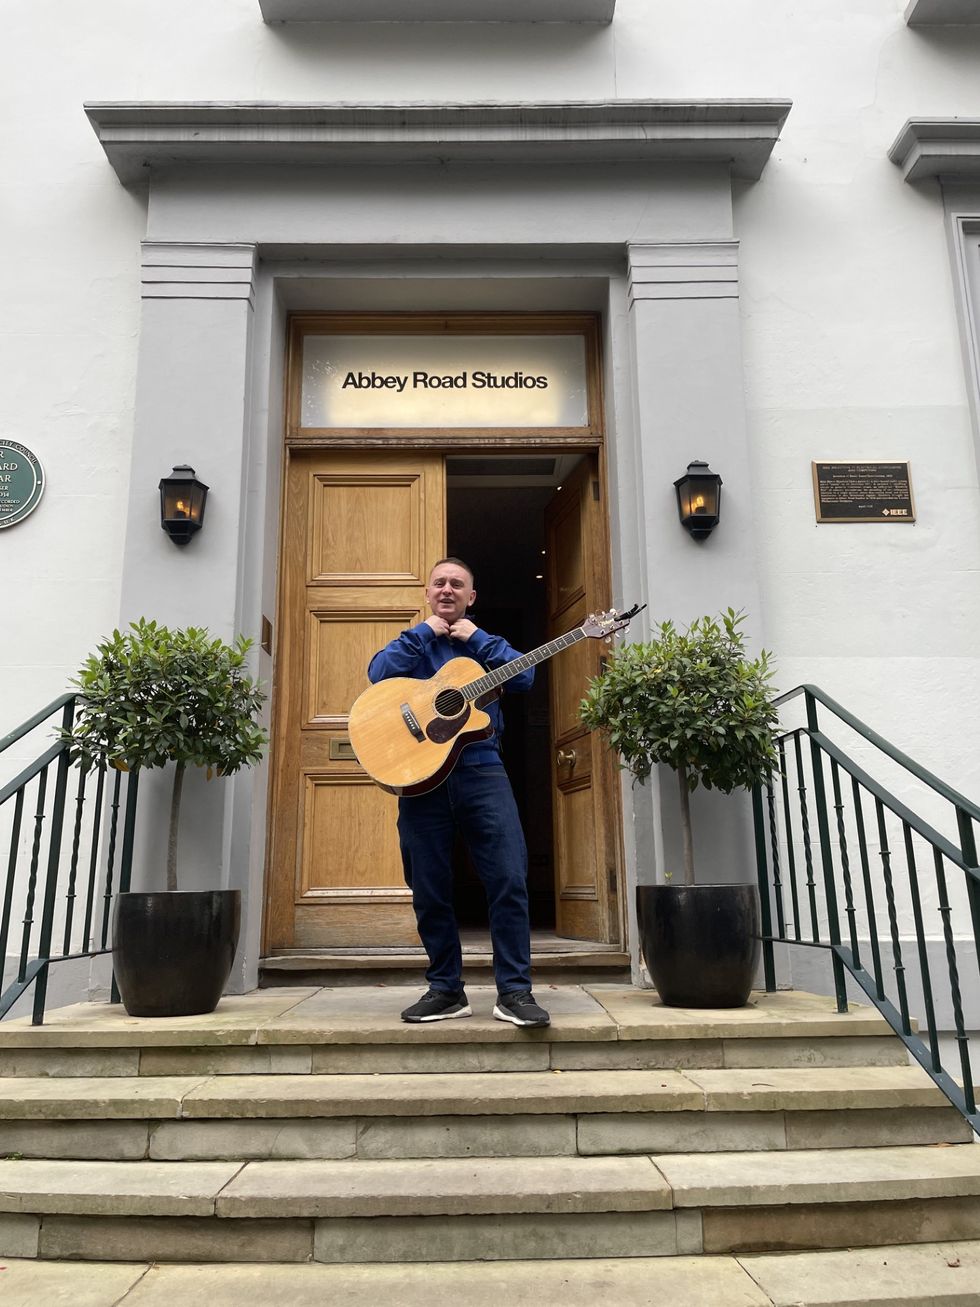 From busking to Abbey Road, it was a dream, says viral musician on album release